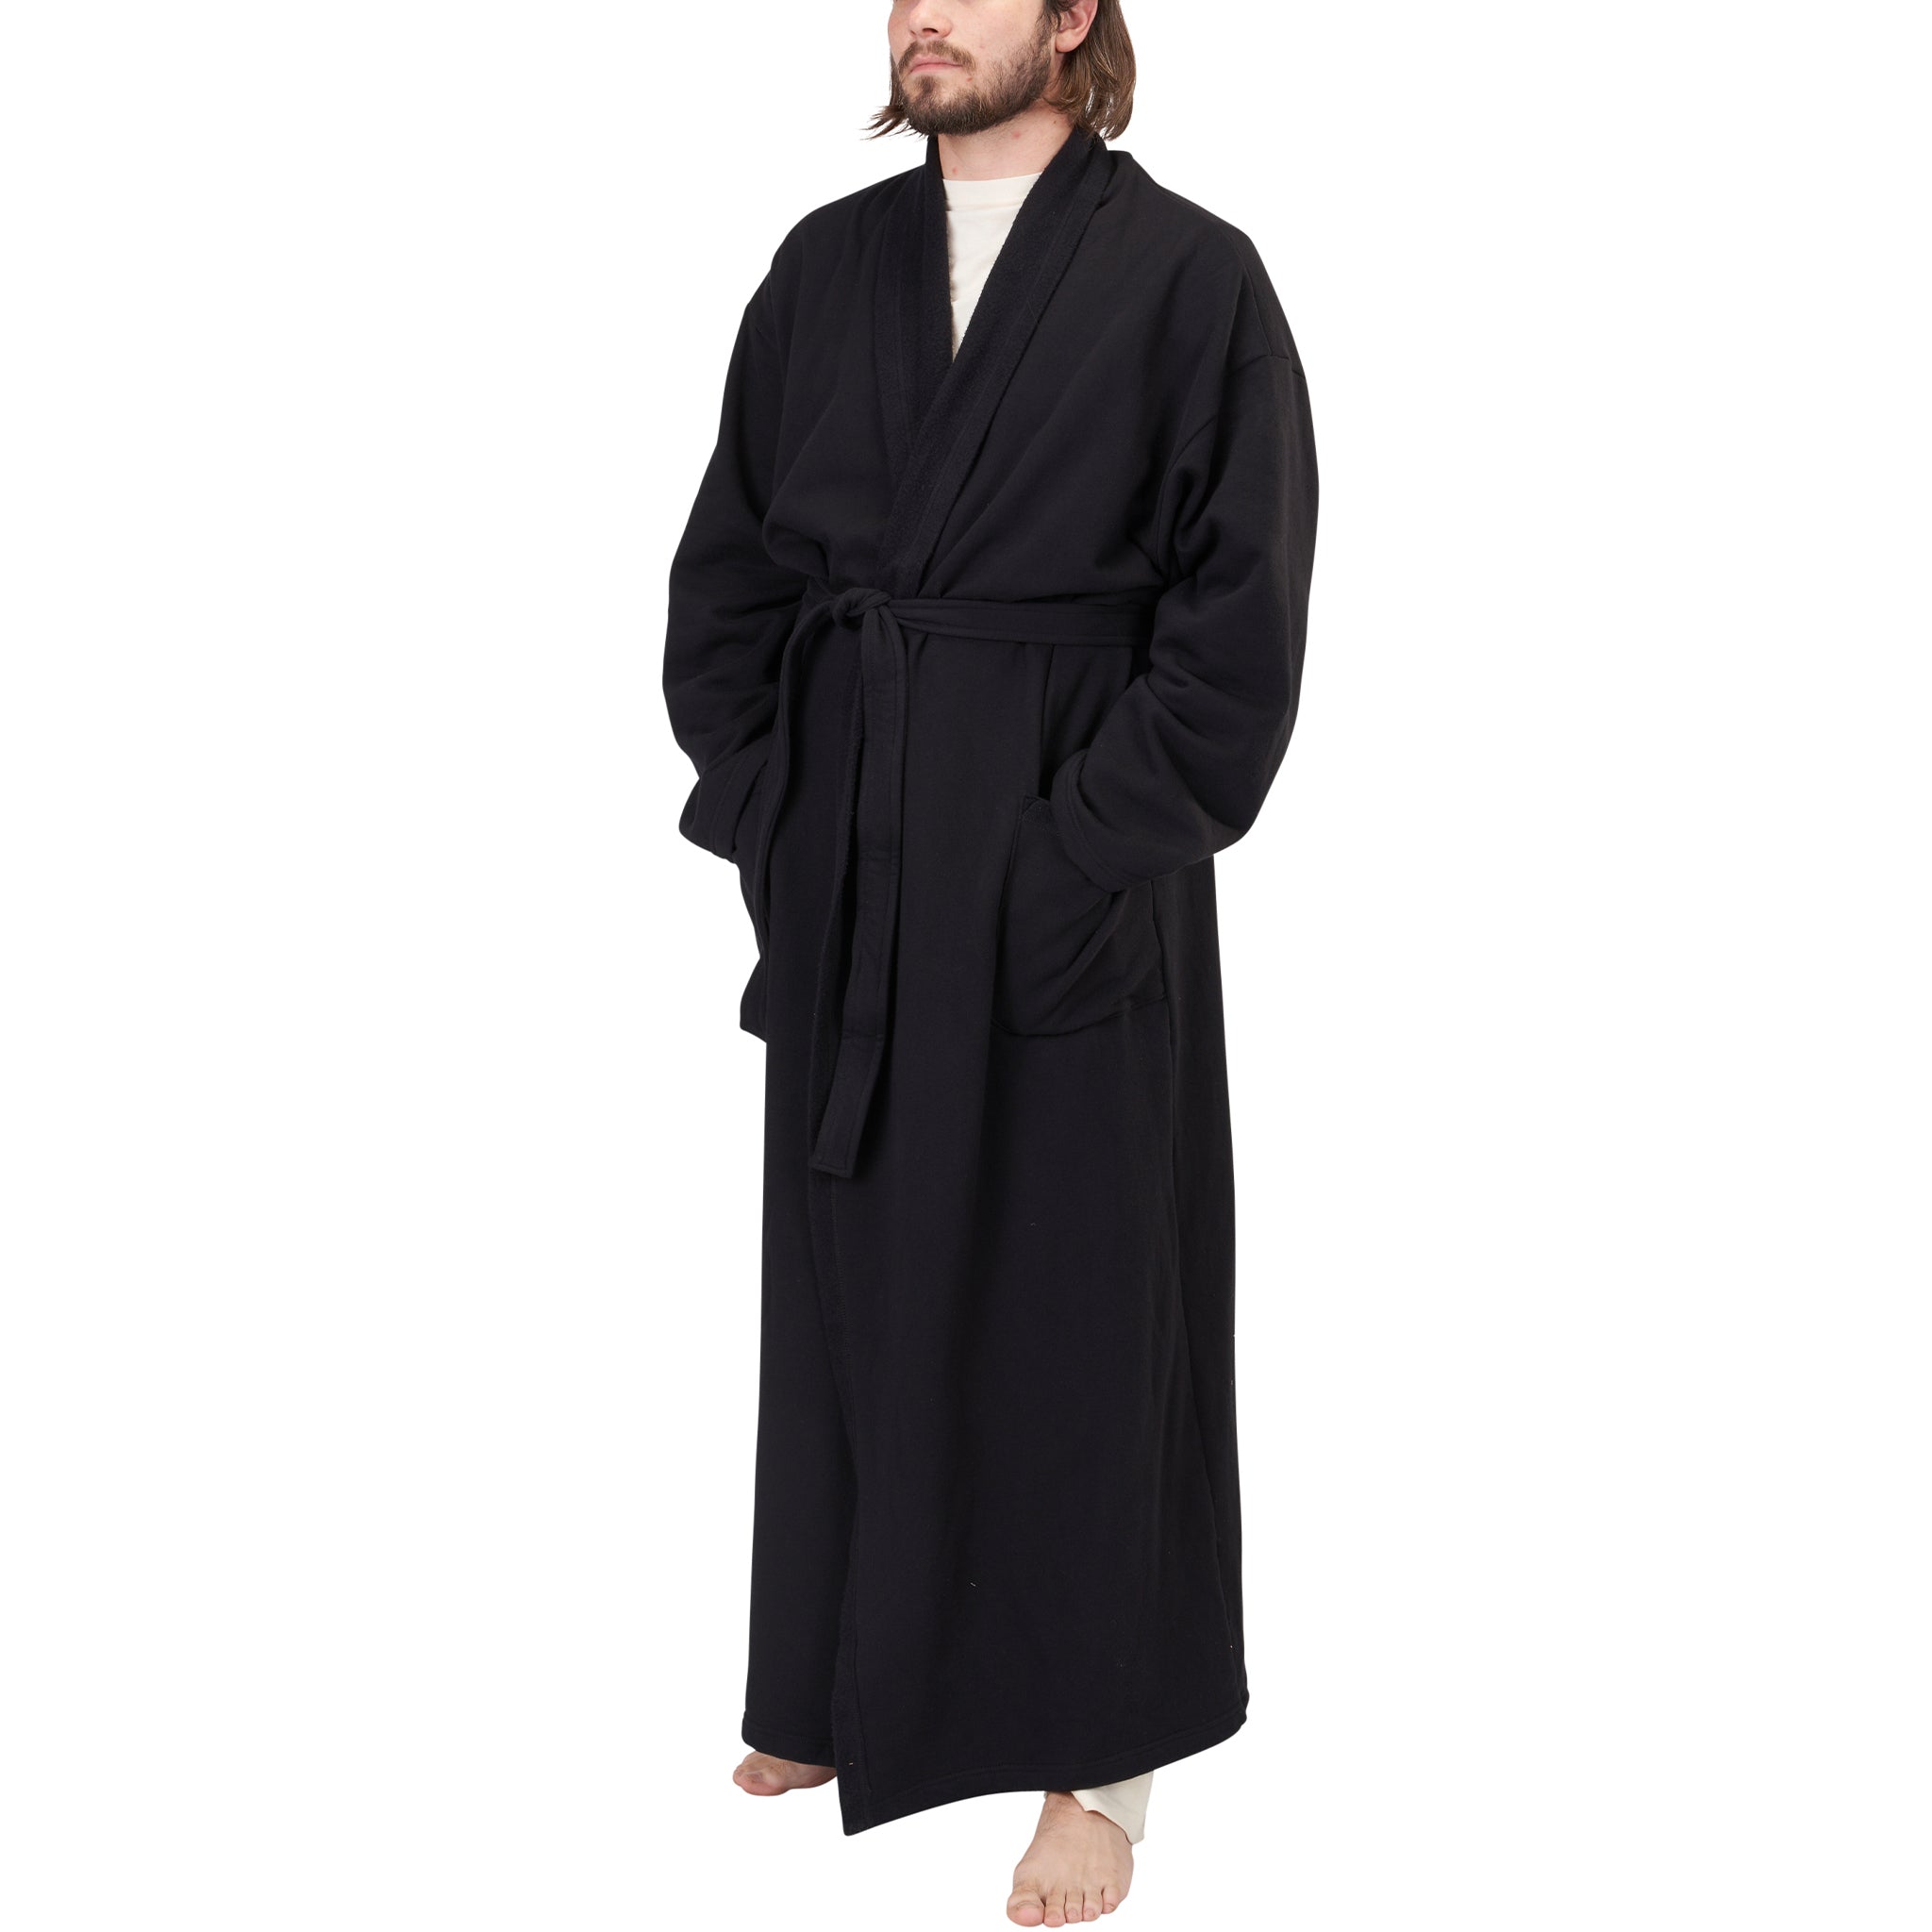 Top more than 127 black cotton dressing gown